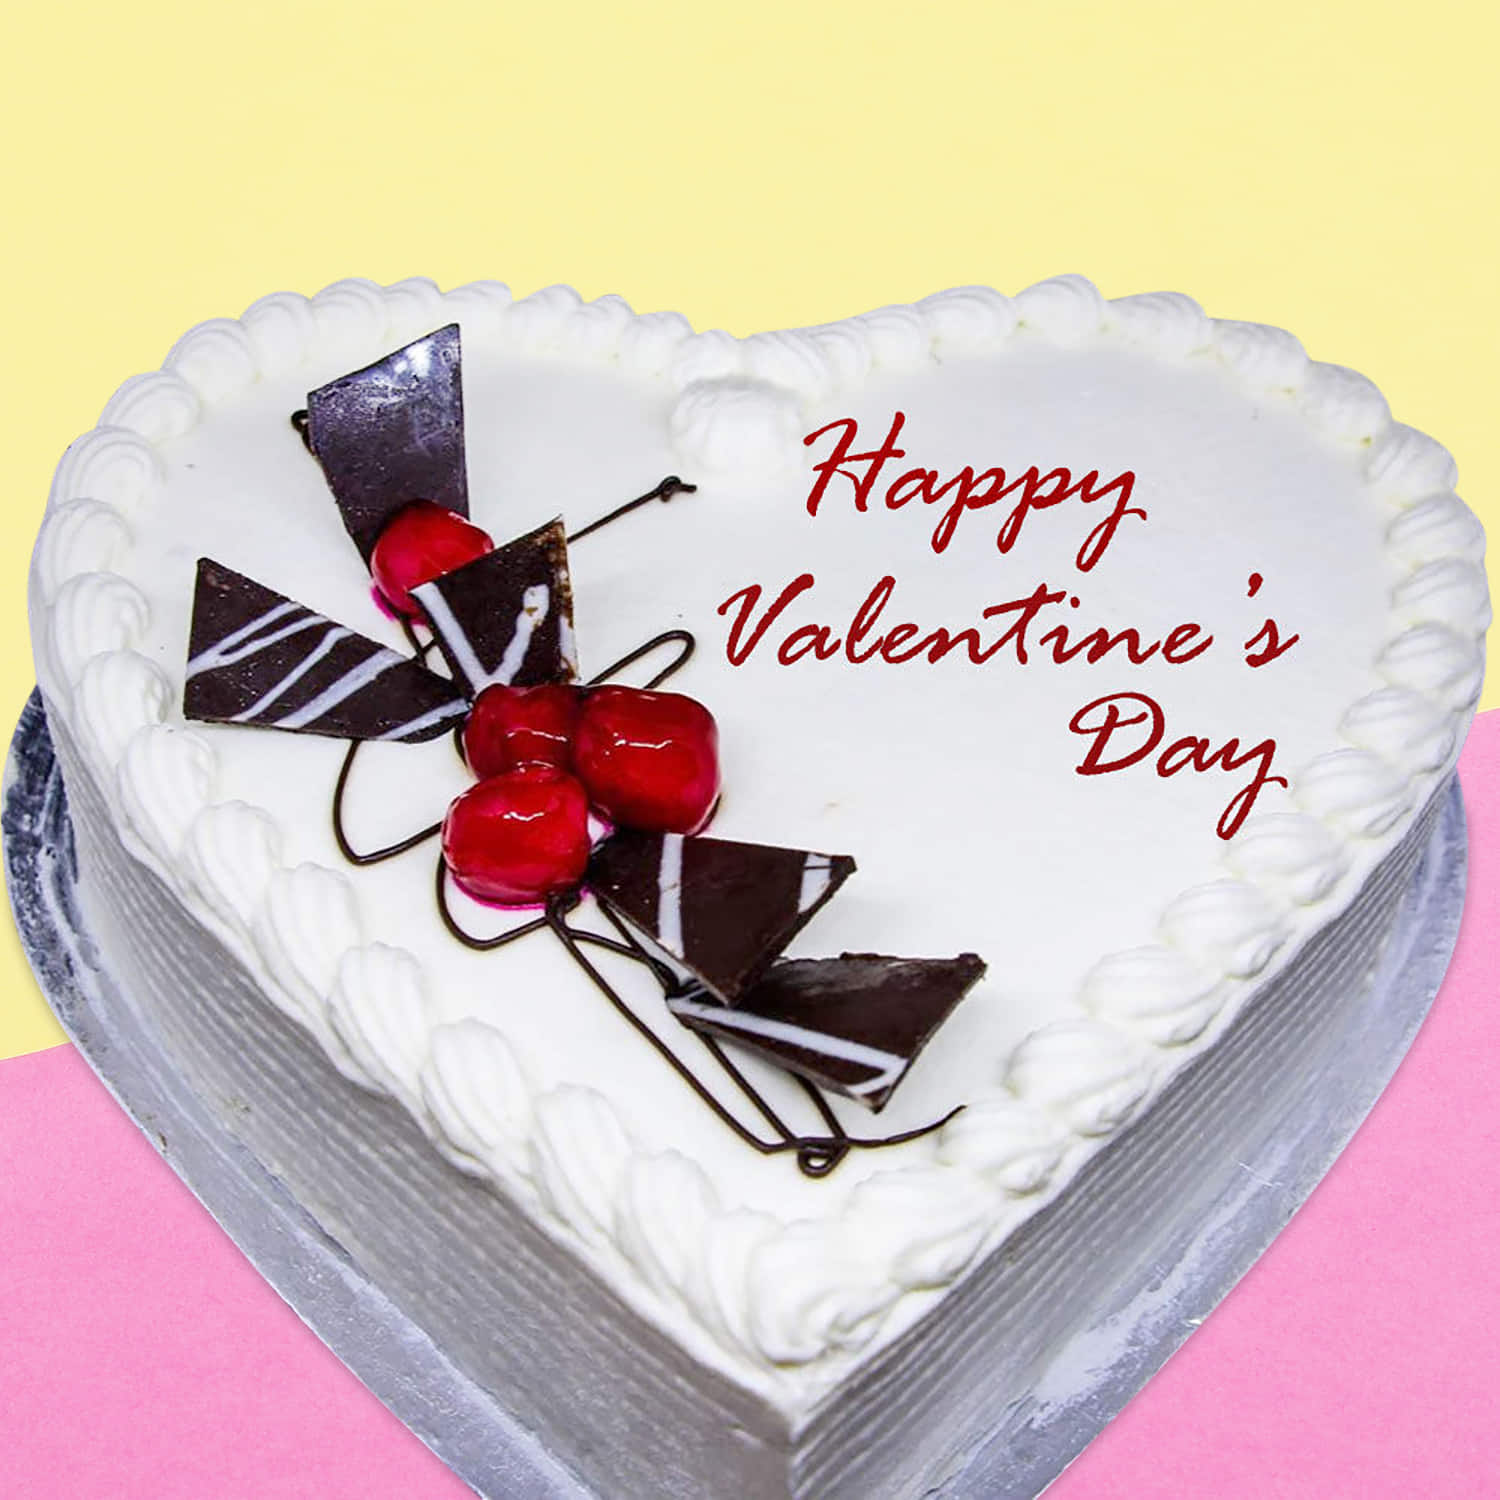 Order Mothers Day Special Photo Cake Online Free Shipping in Delhi, NCR,  Bangalore,Jaipur, Hyderabad | Delhi NCR